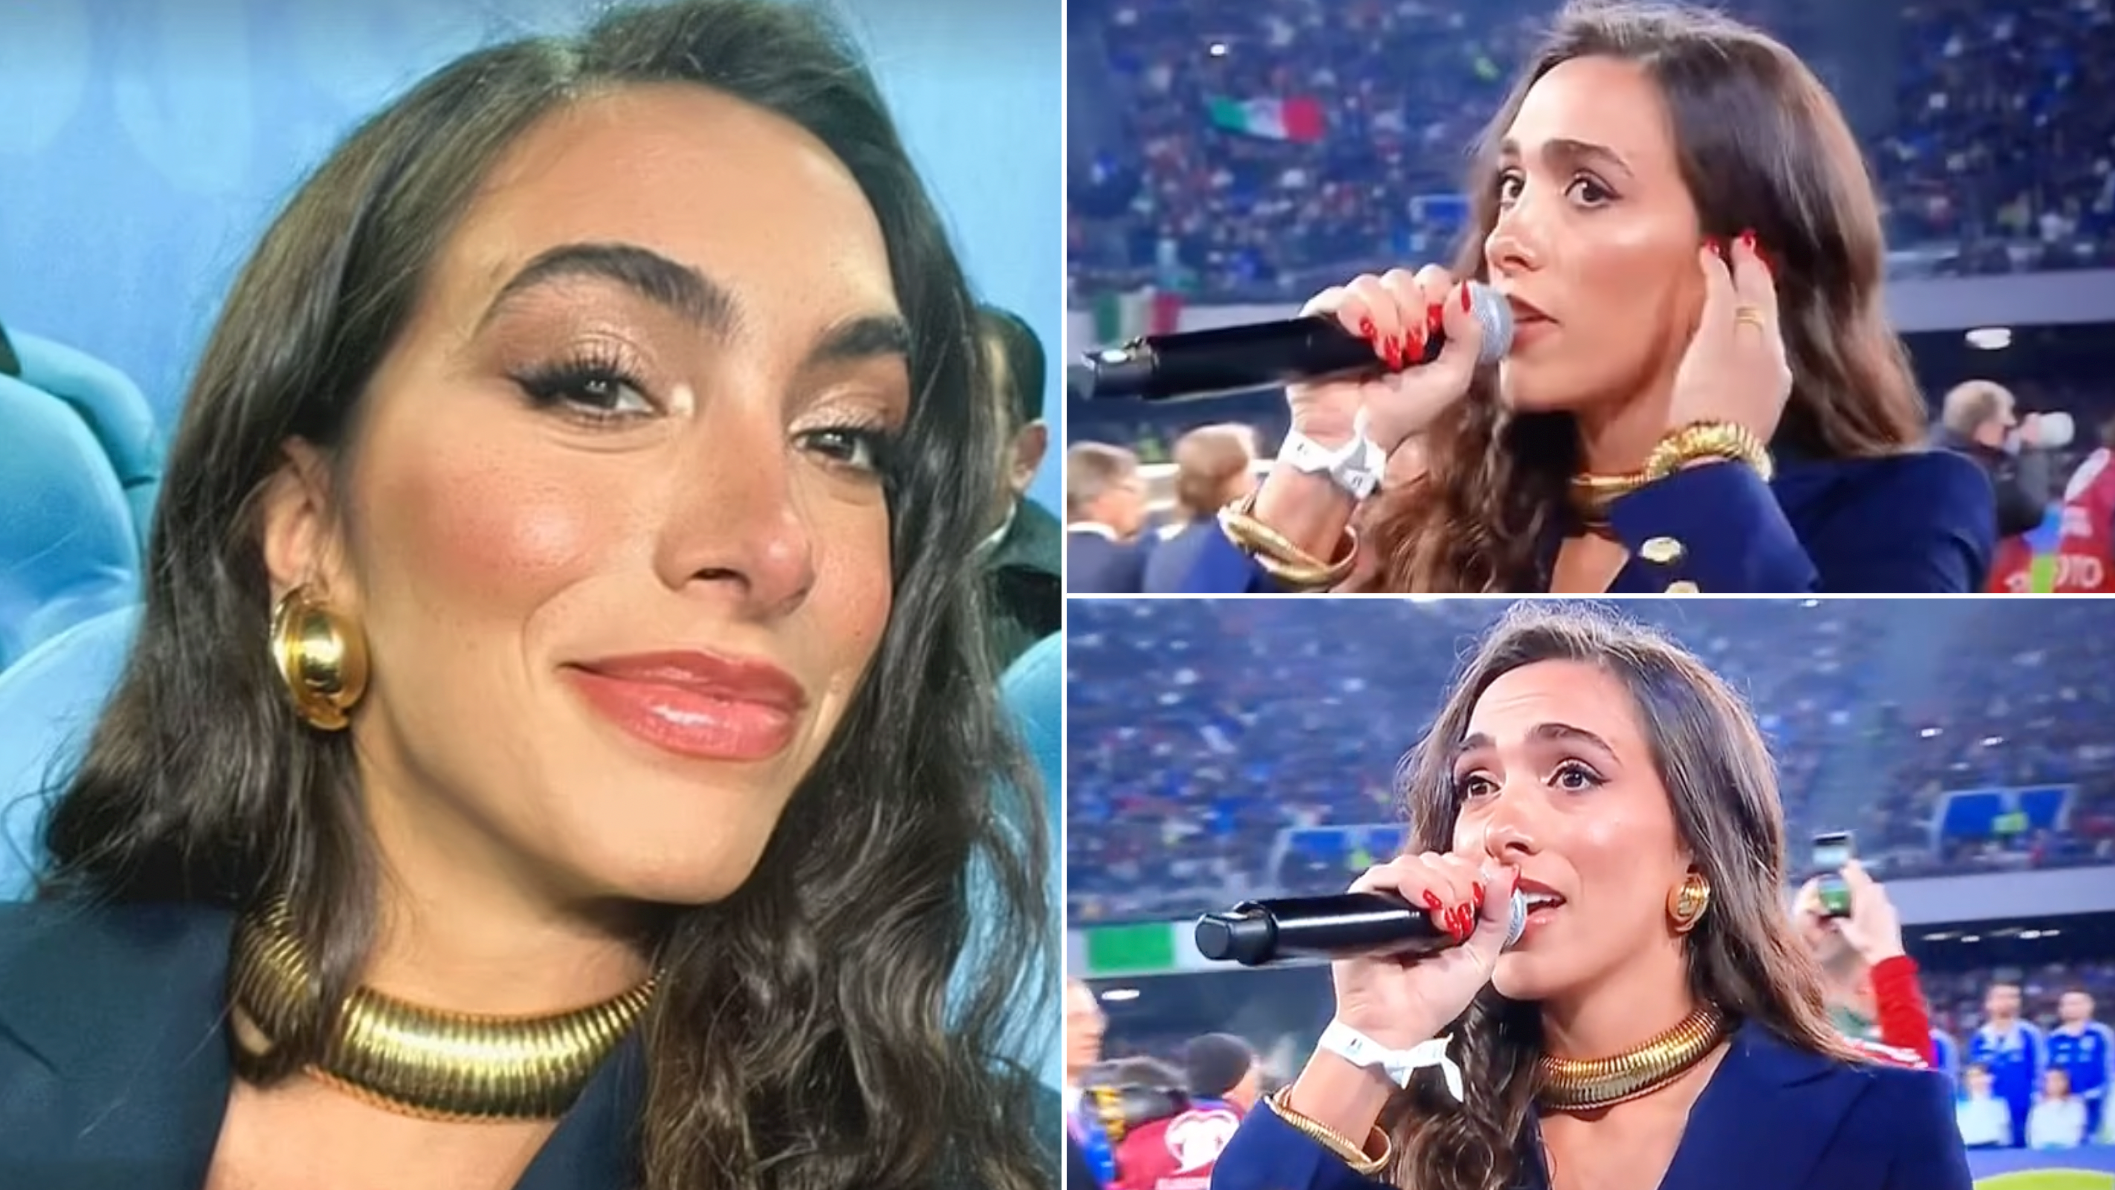 Stunning singer Ellynora sends cheeky message to England fans